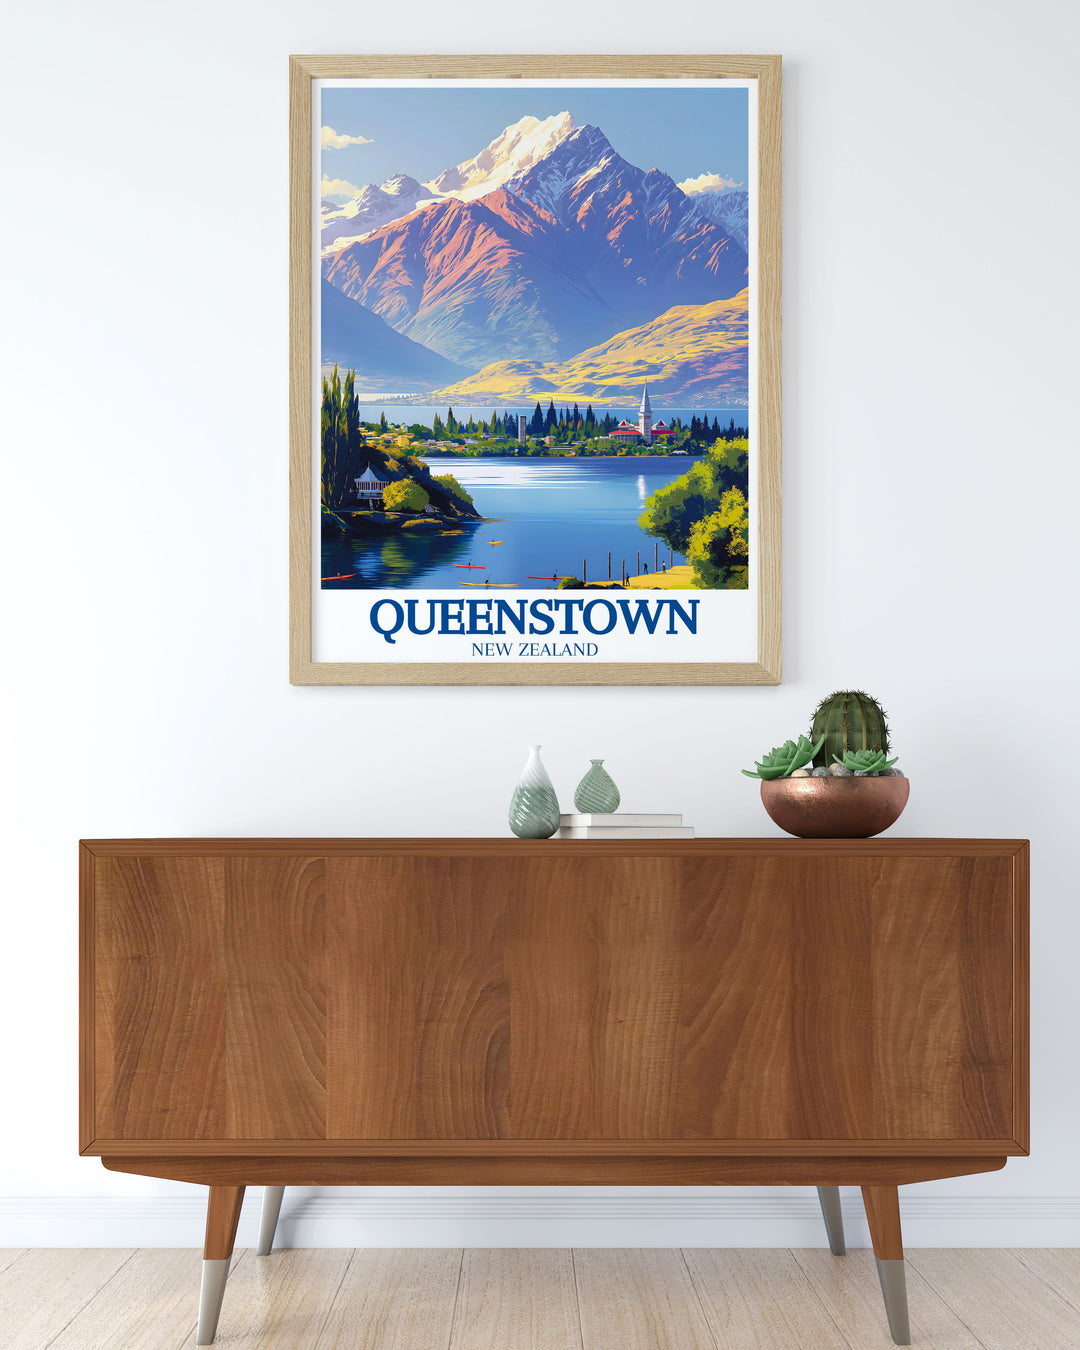 Fine line print of Queenstown showcasing The Remarkables Lake Wakatipu with a timeless black and white design ideal for matted art frames great for enhancing your living room or office decor perfect for gifts and wall art lovers